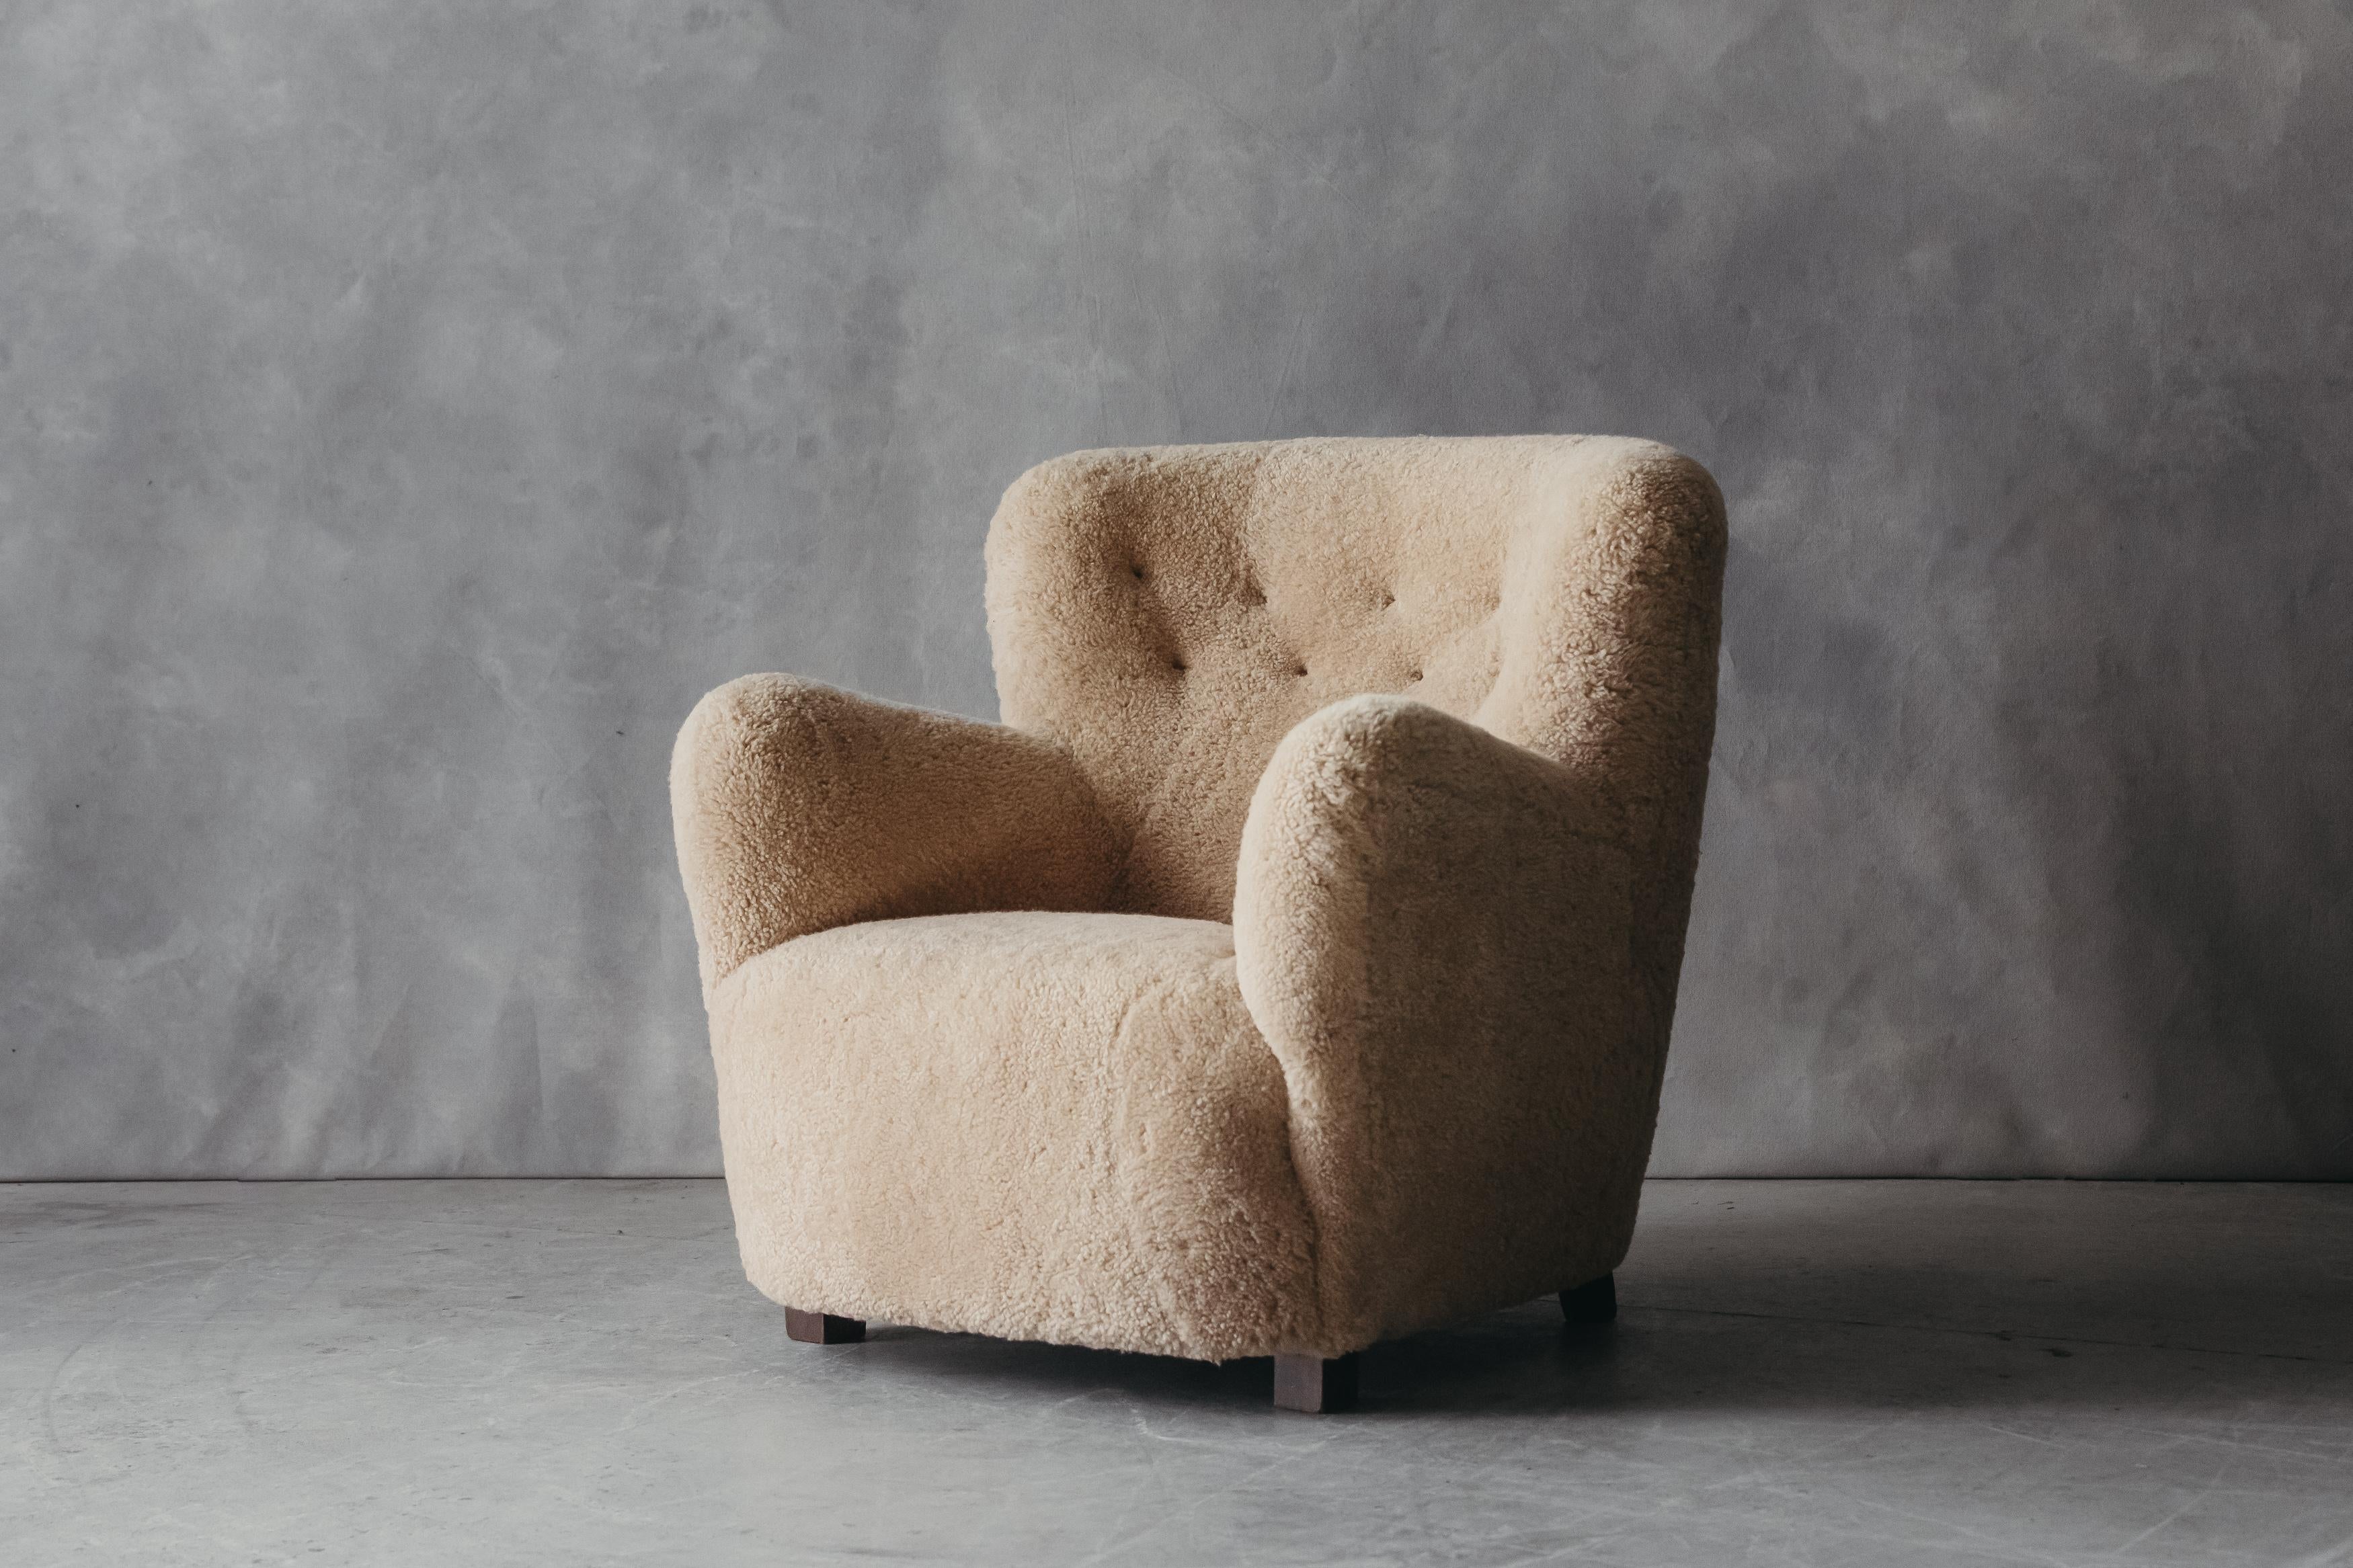 Vintage Sheepskin Lounge chair from Denmark, circa 1960. Very comfortable model, later upholstered in light tan shearling.

 